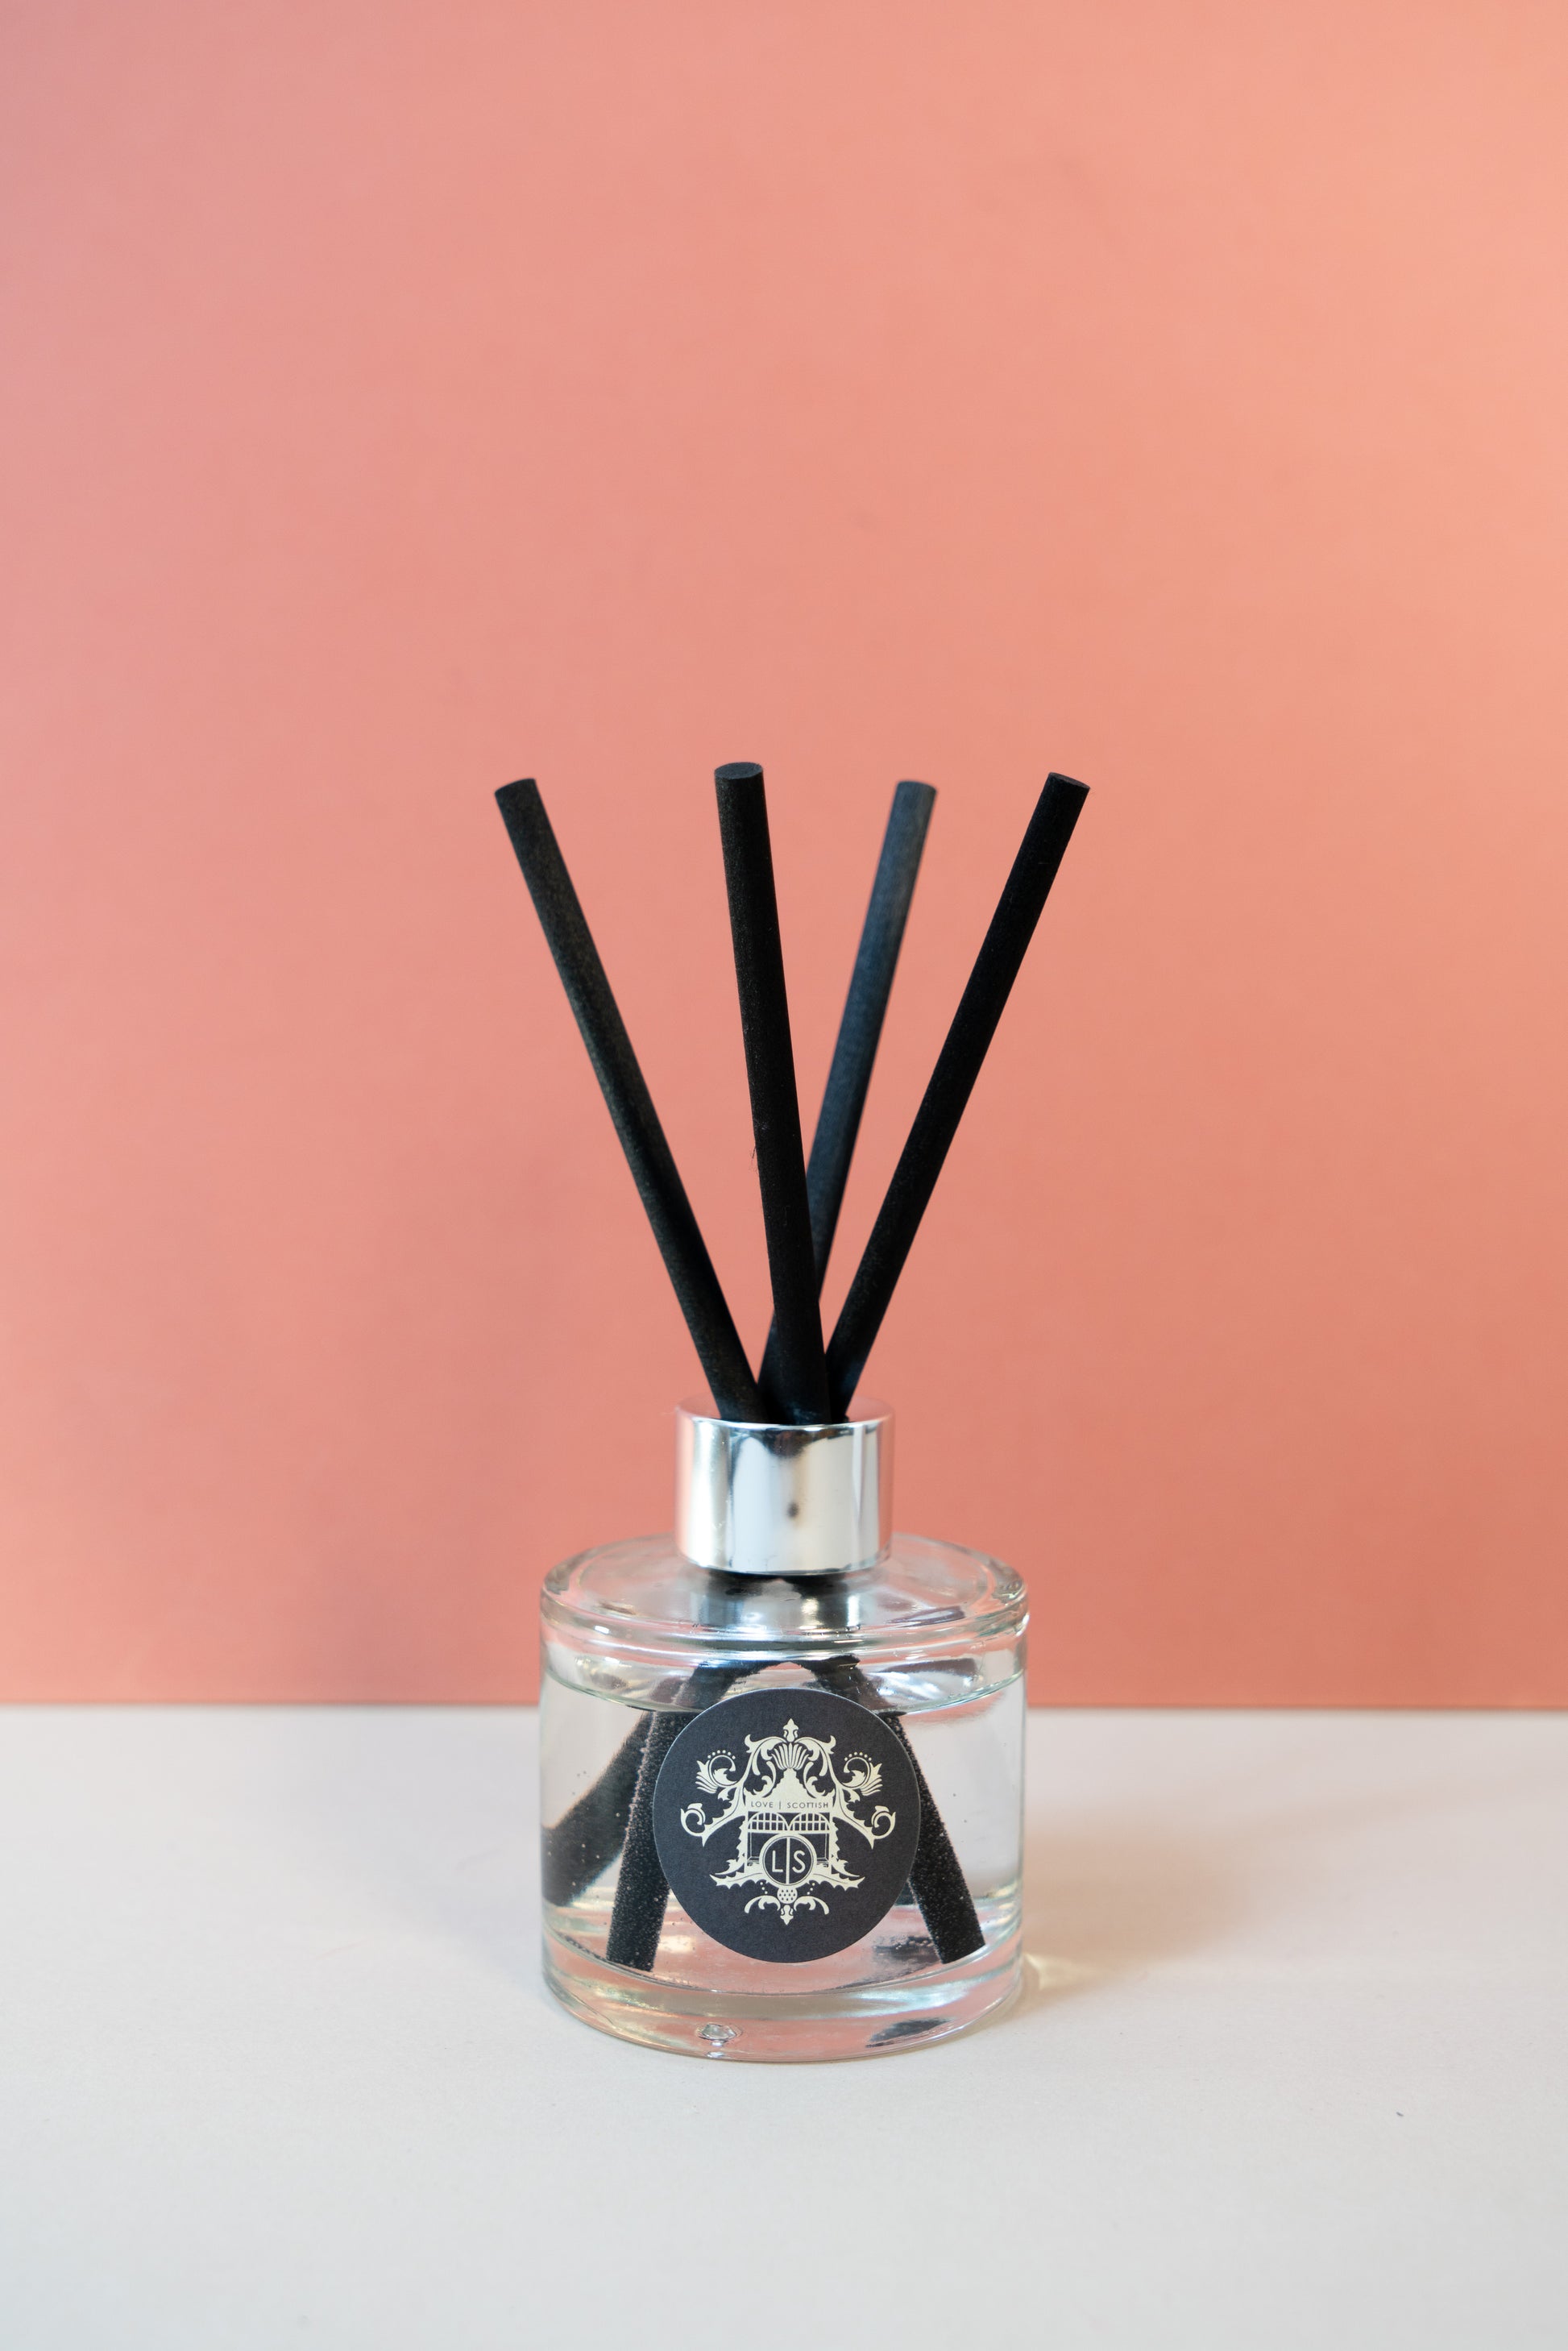 Black Pomegranate Diffuser on a Pink Background